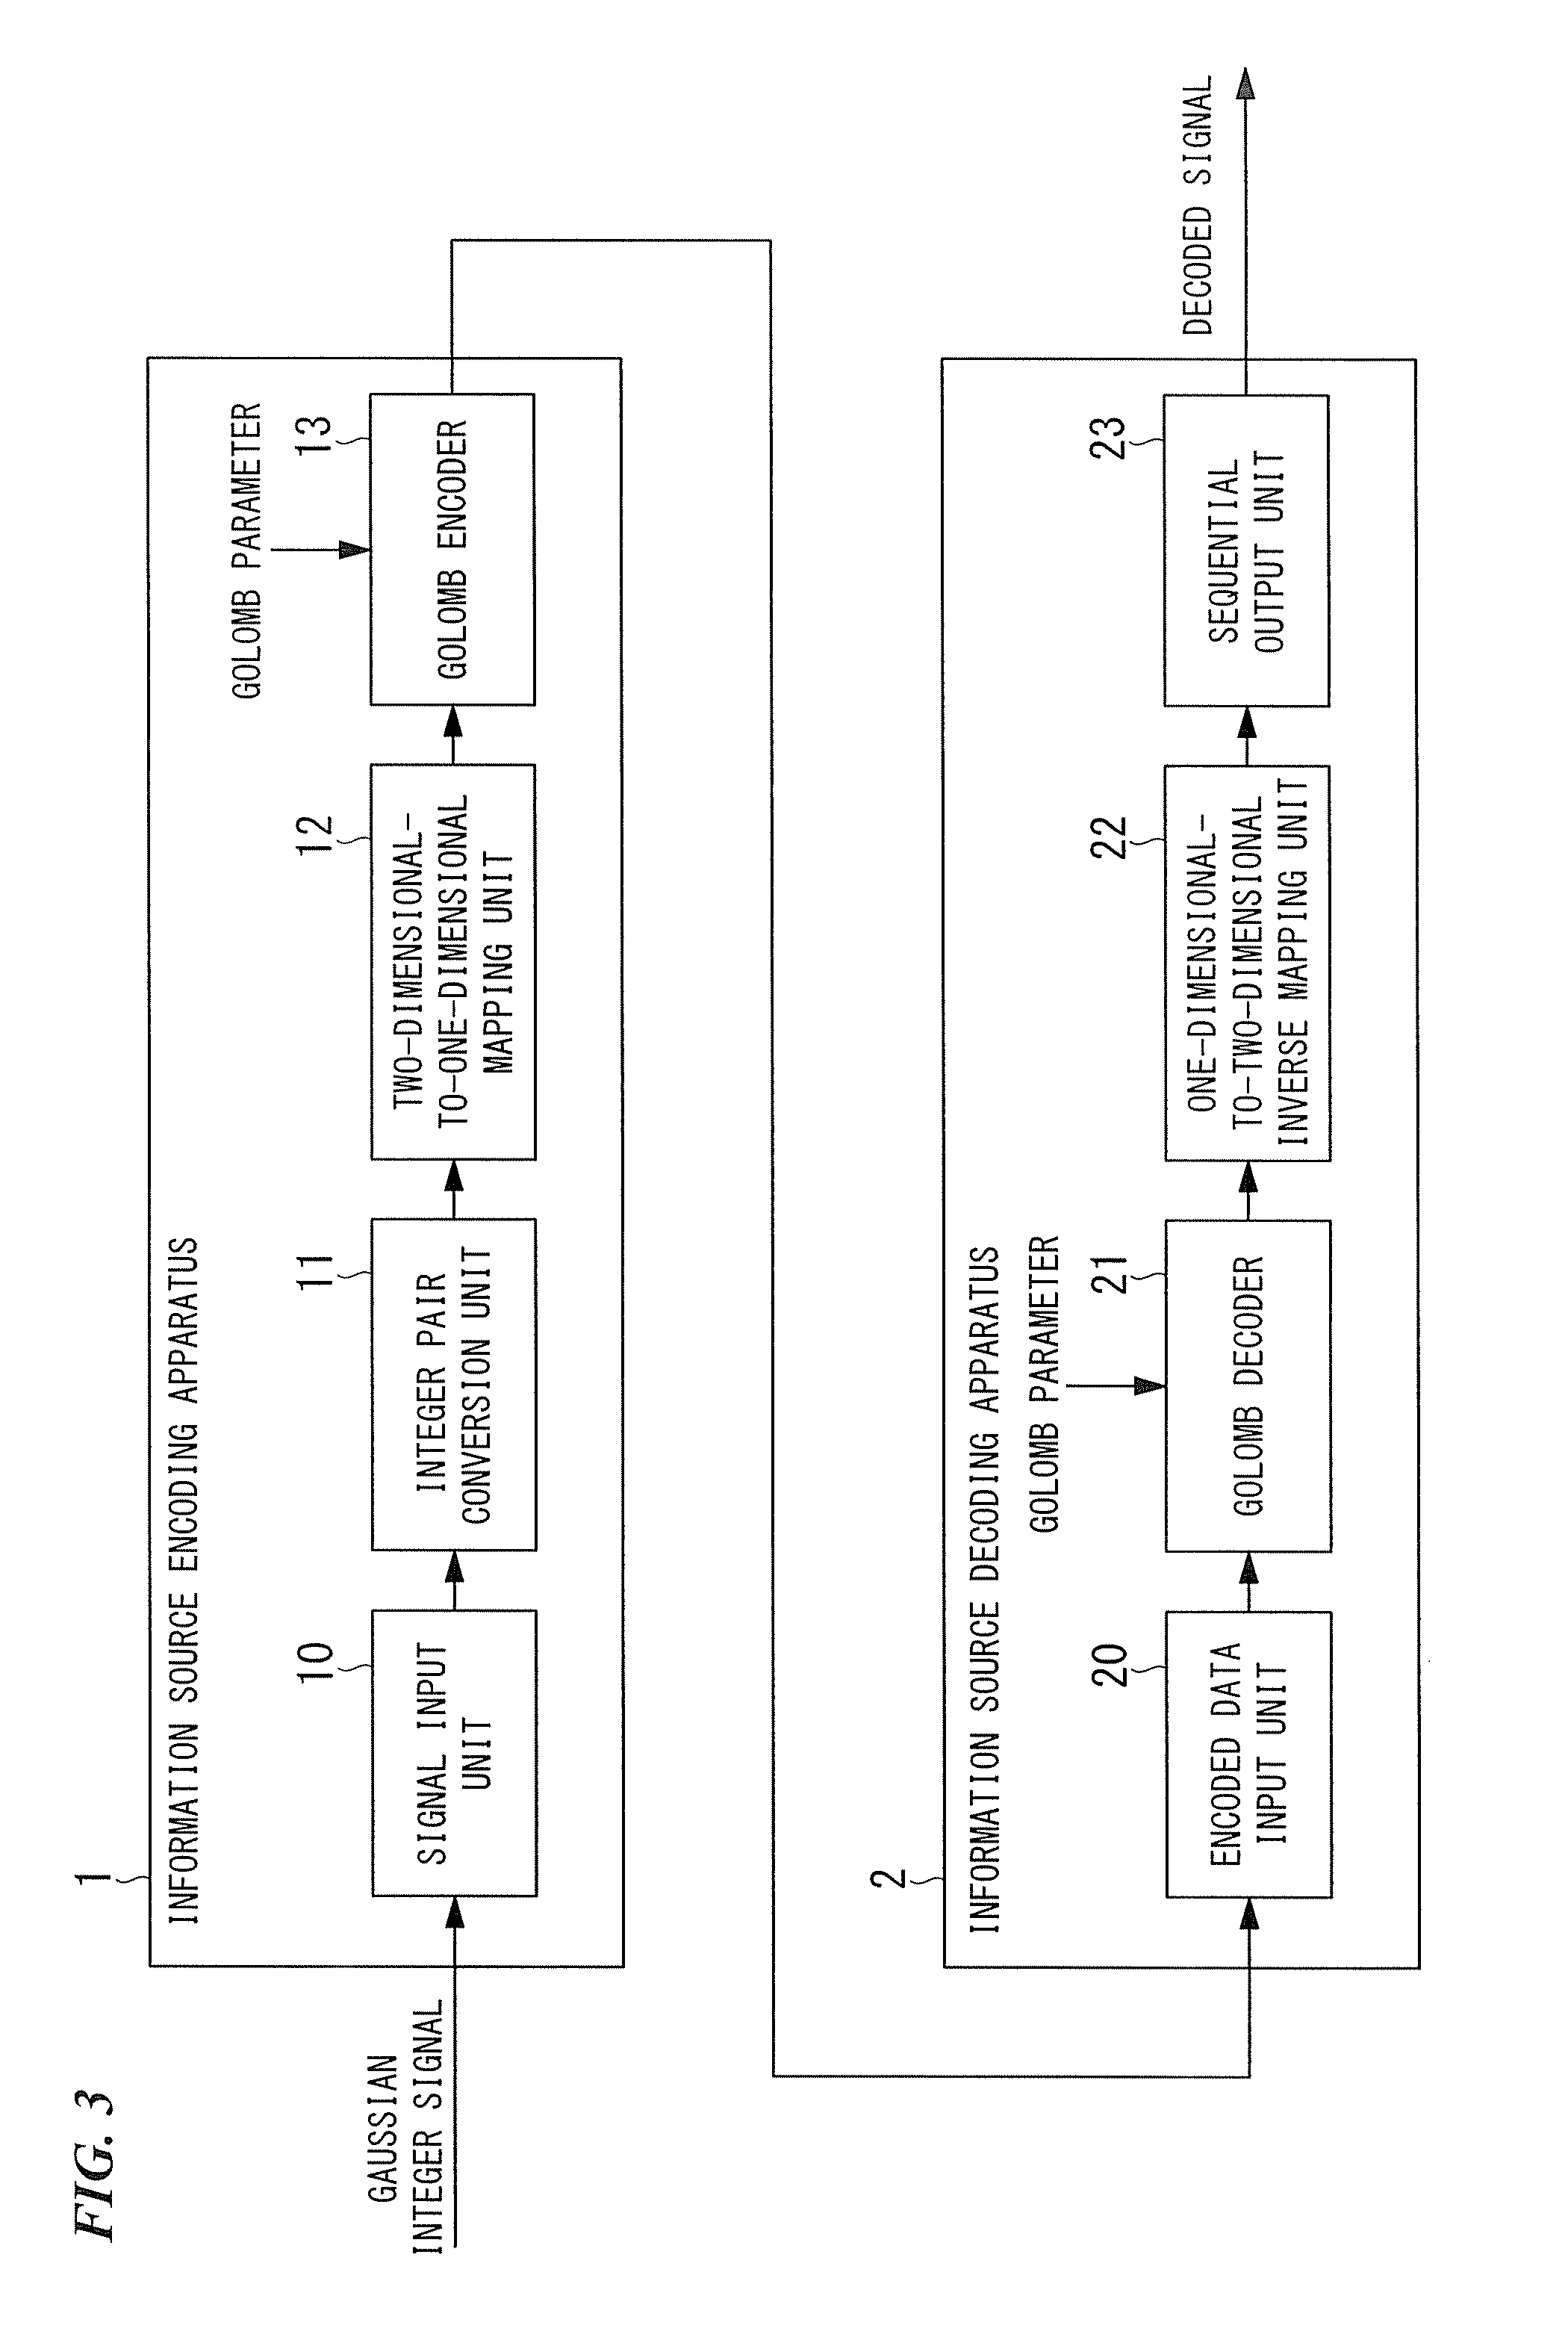 Image signal encoding method and decoding method, information source encoding method and decoding method, apparatuses therefor, programs therefor, and storage media which store the programs